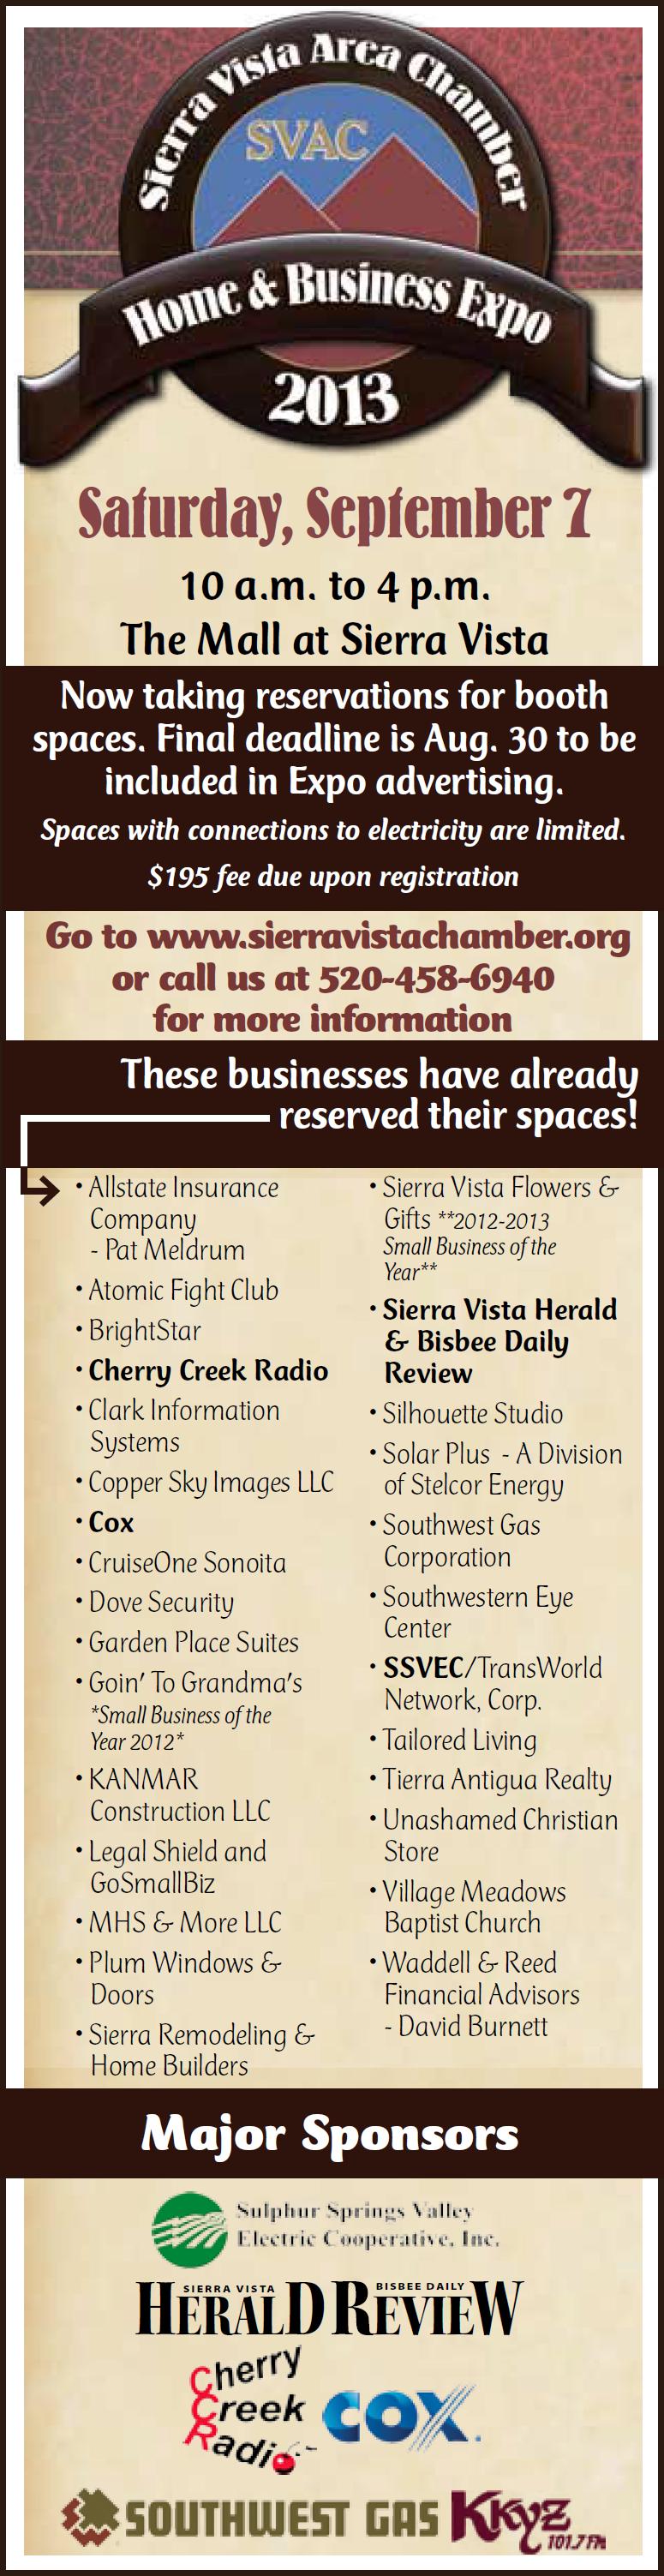 Jan-Dec Business At Twilight Sponsorship: $100 Exposure on Chamber s website, Facebook page and Twitter account.